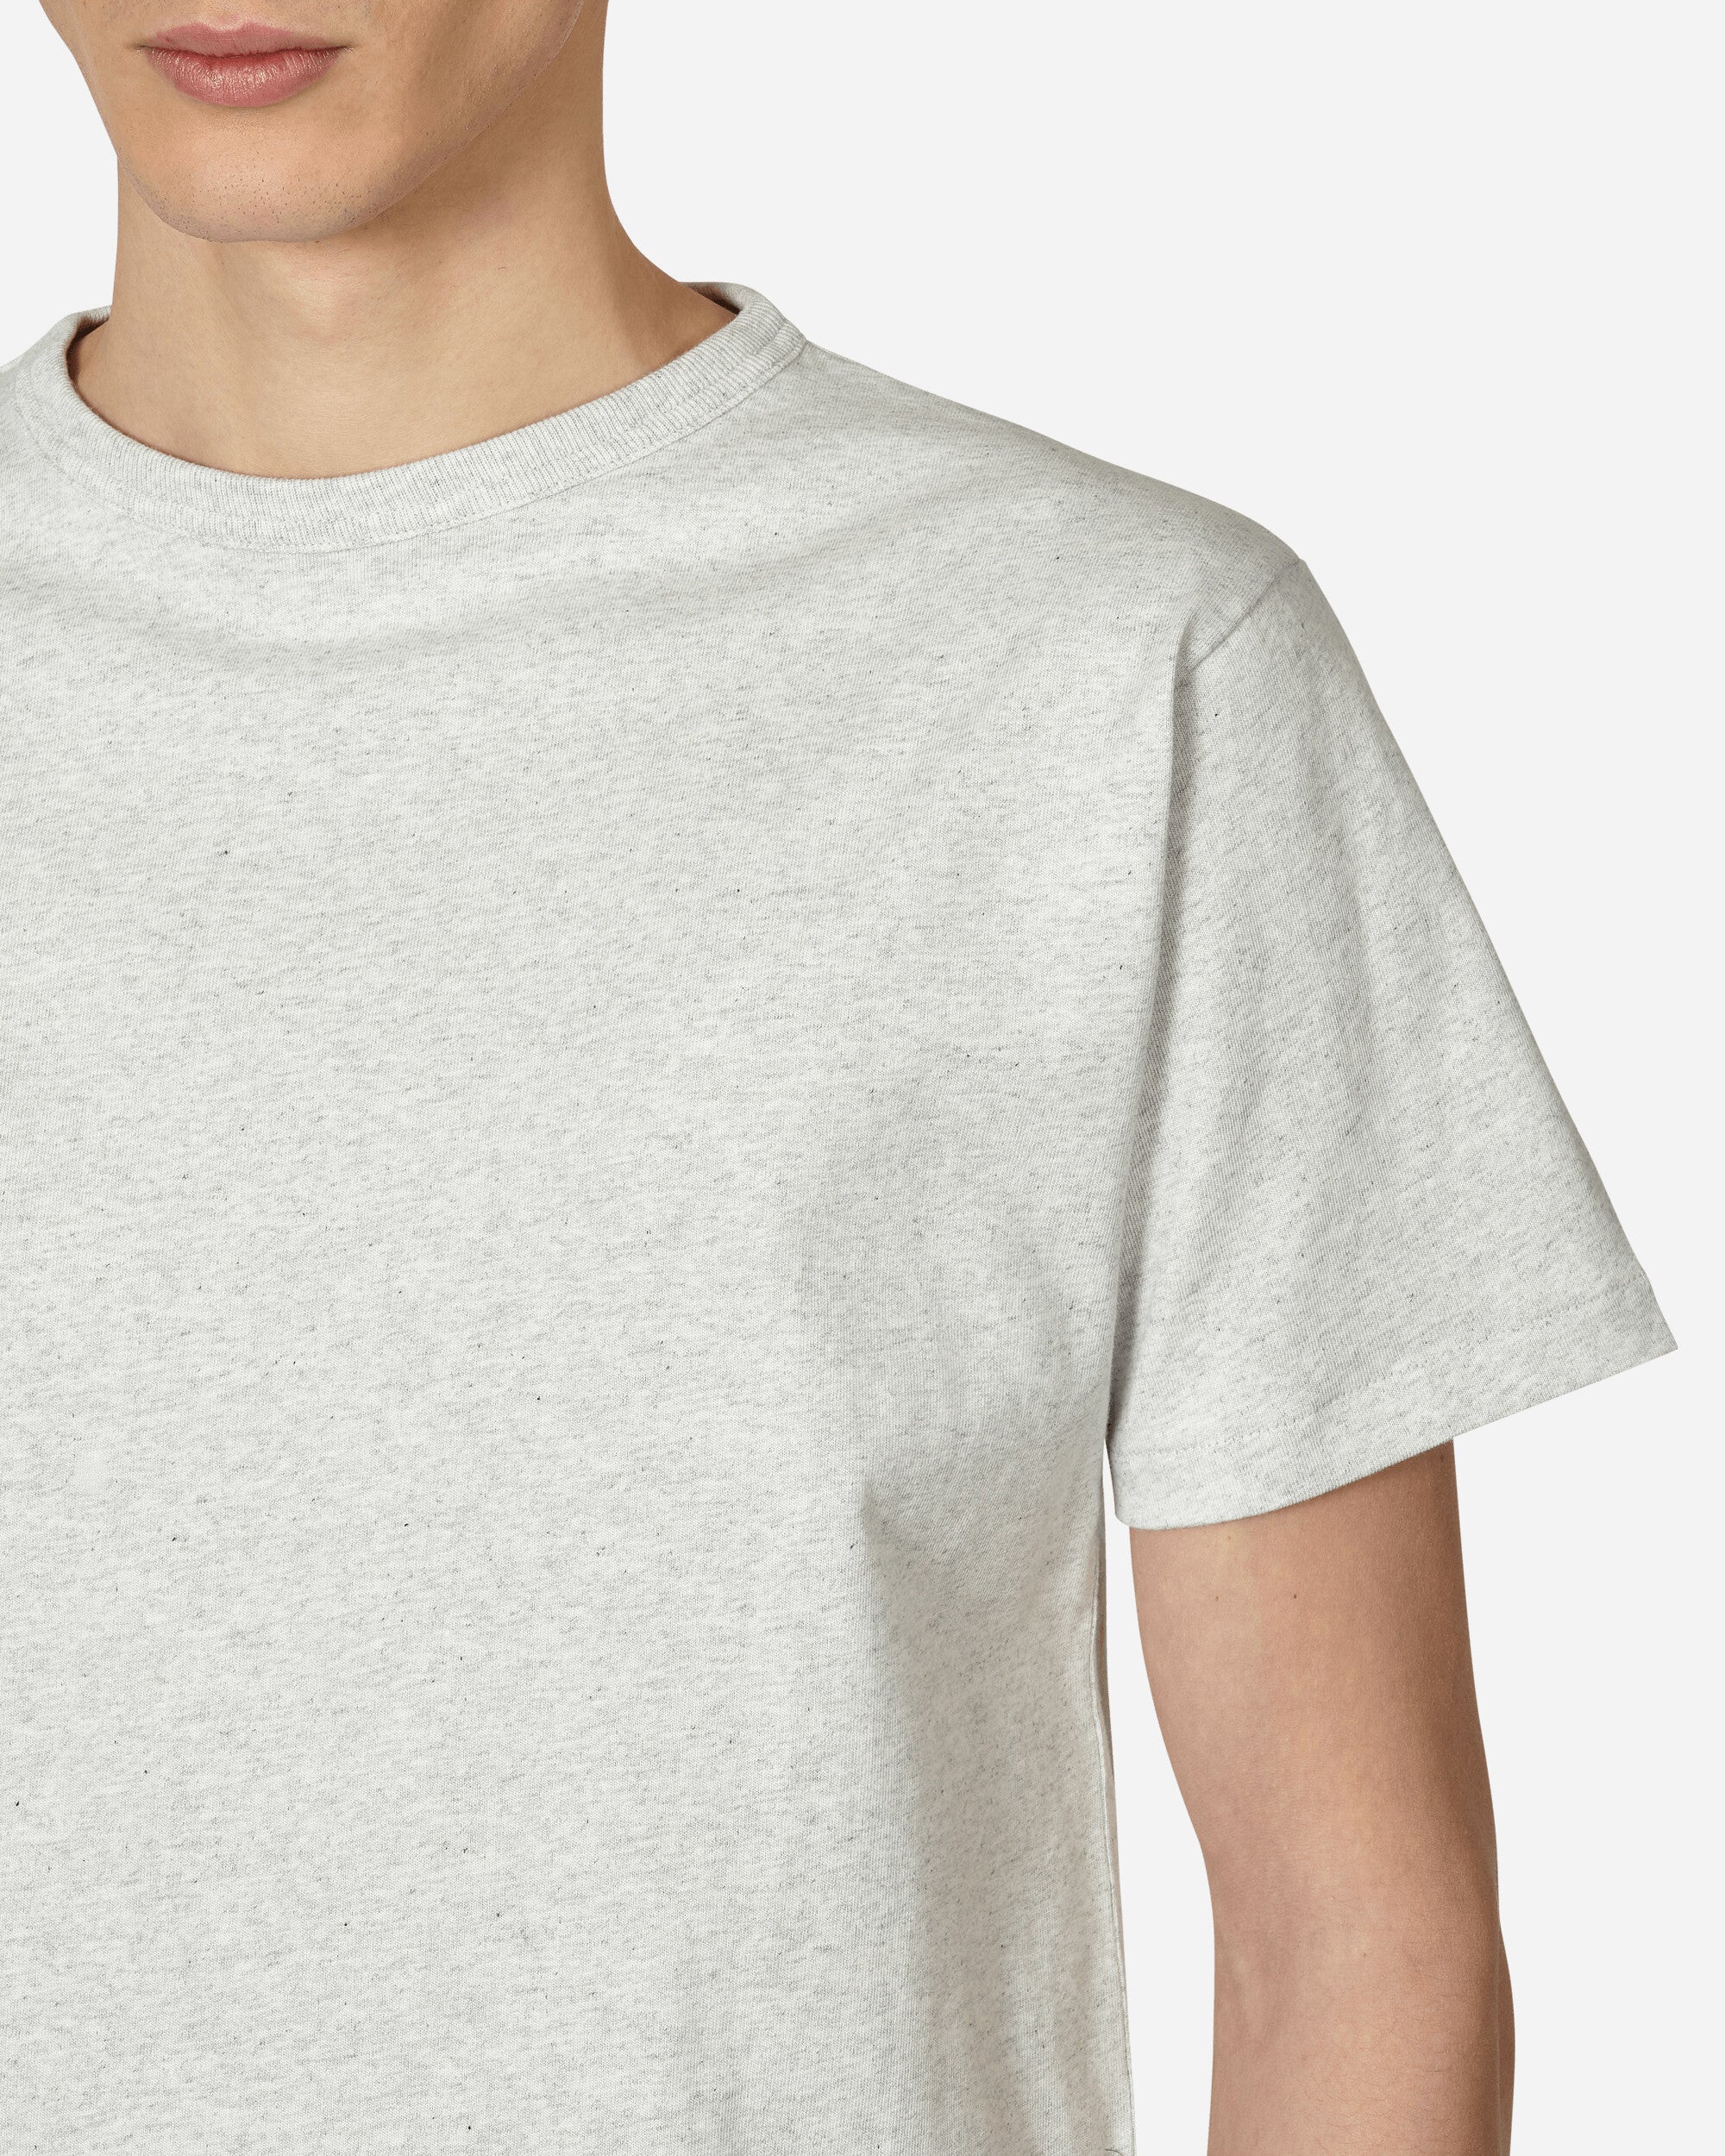 Levi's® Made & Crafted New Classic Tee Club Heather Grey T-Shirts Shortsleeve A2134 0010